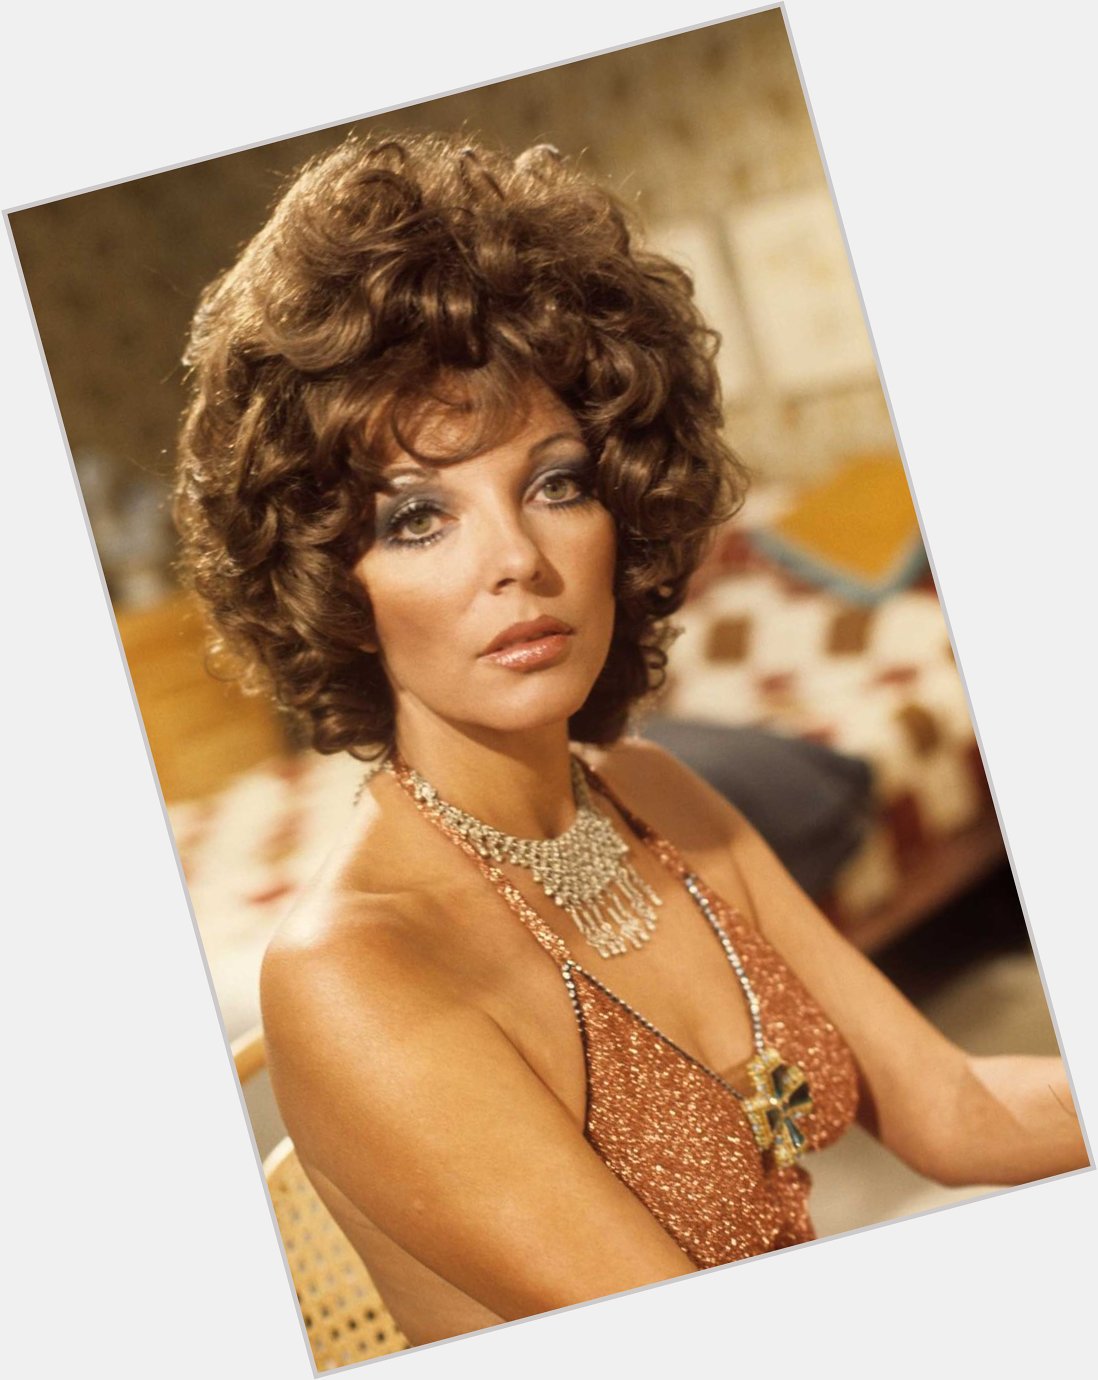 Good morning. Starting today with a Happy Birthday  JOAN COLLINS 